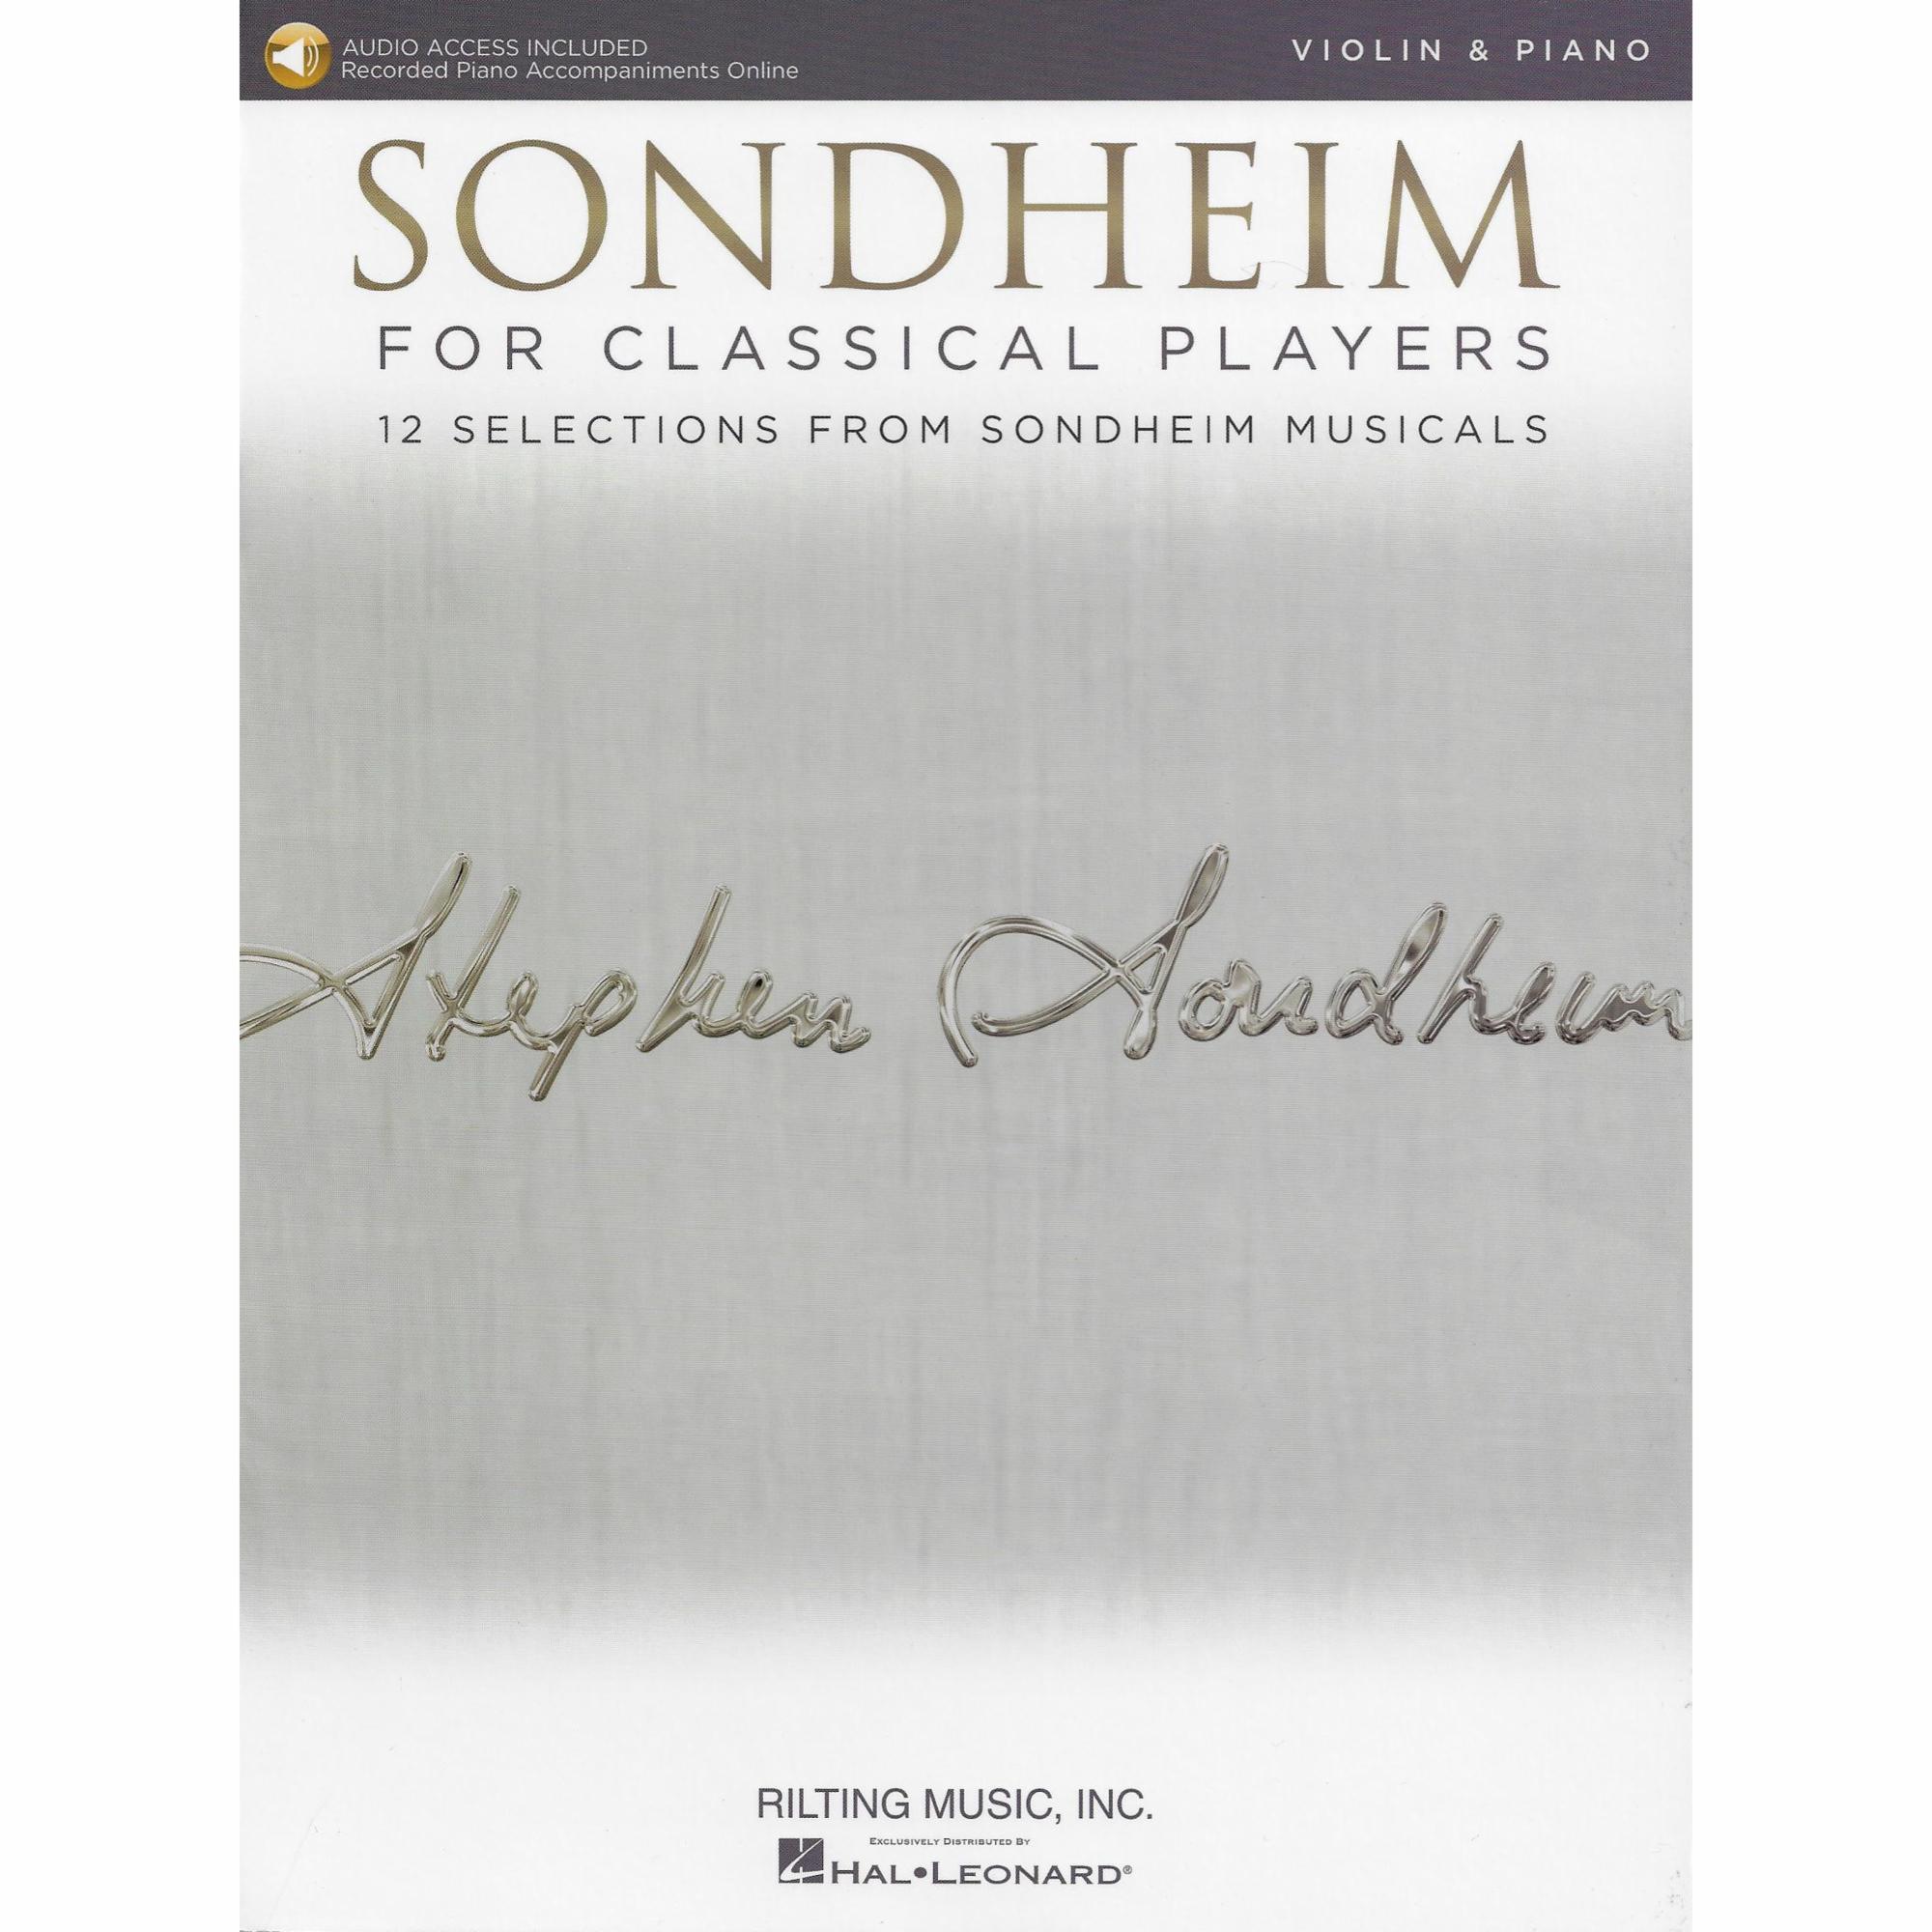 Sondheim for Classical Players for Violin or Cello and Piano